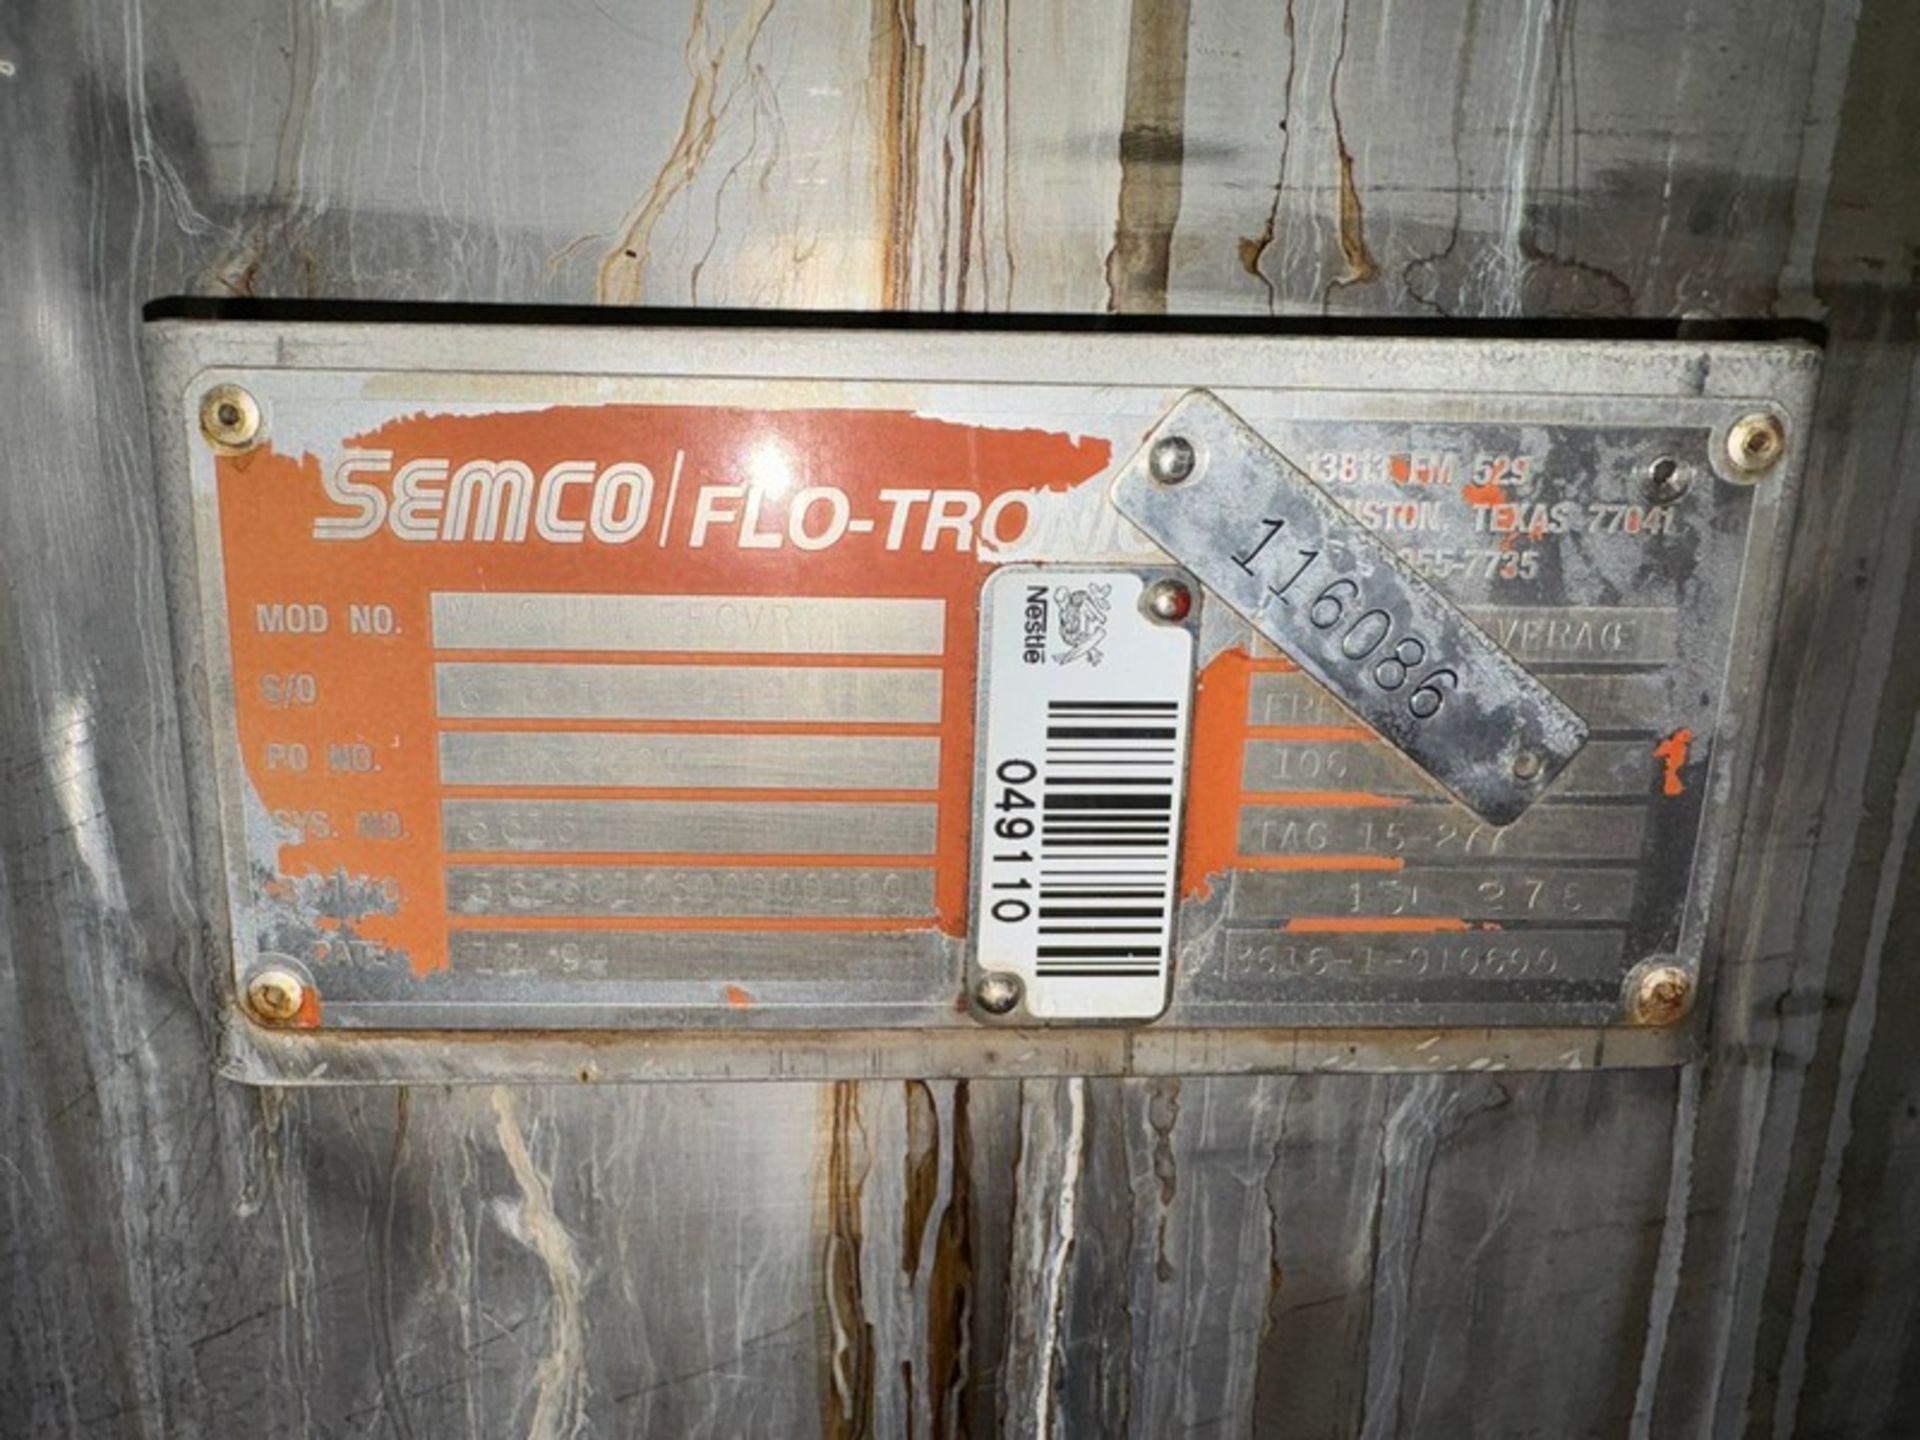 Semco Flo-Tronics S/S Vacuum Receiver, S/N 616010, System No. 3616 (N: 049110) (LOCATED IN FREEHOLD, - Image 3 of 4